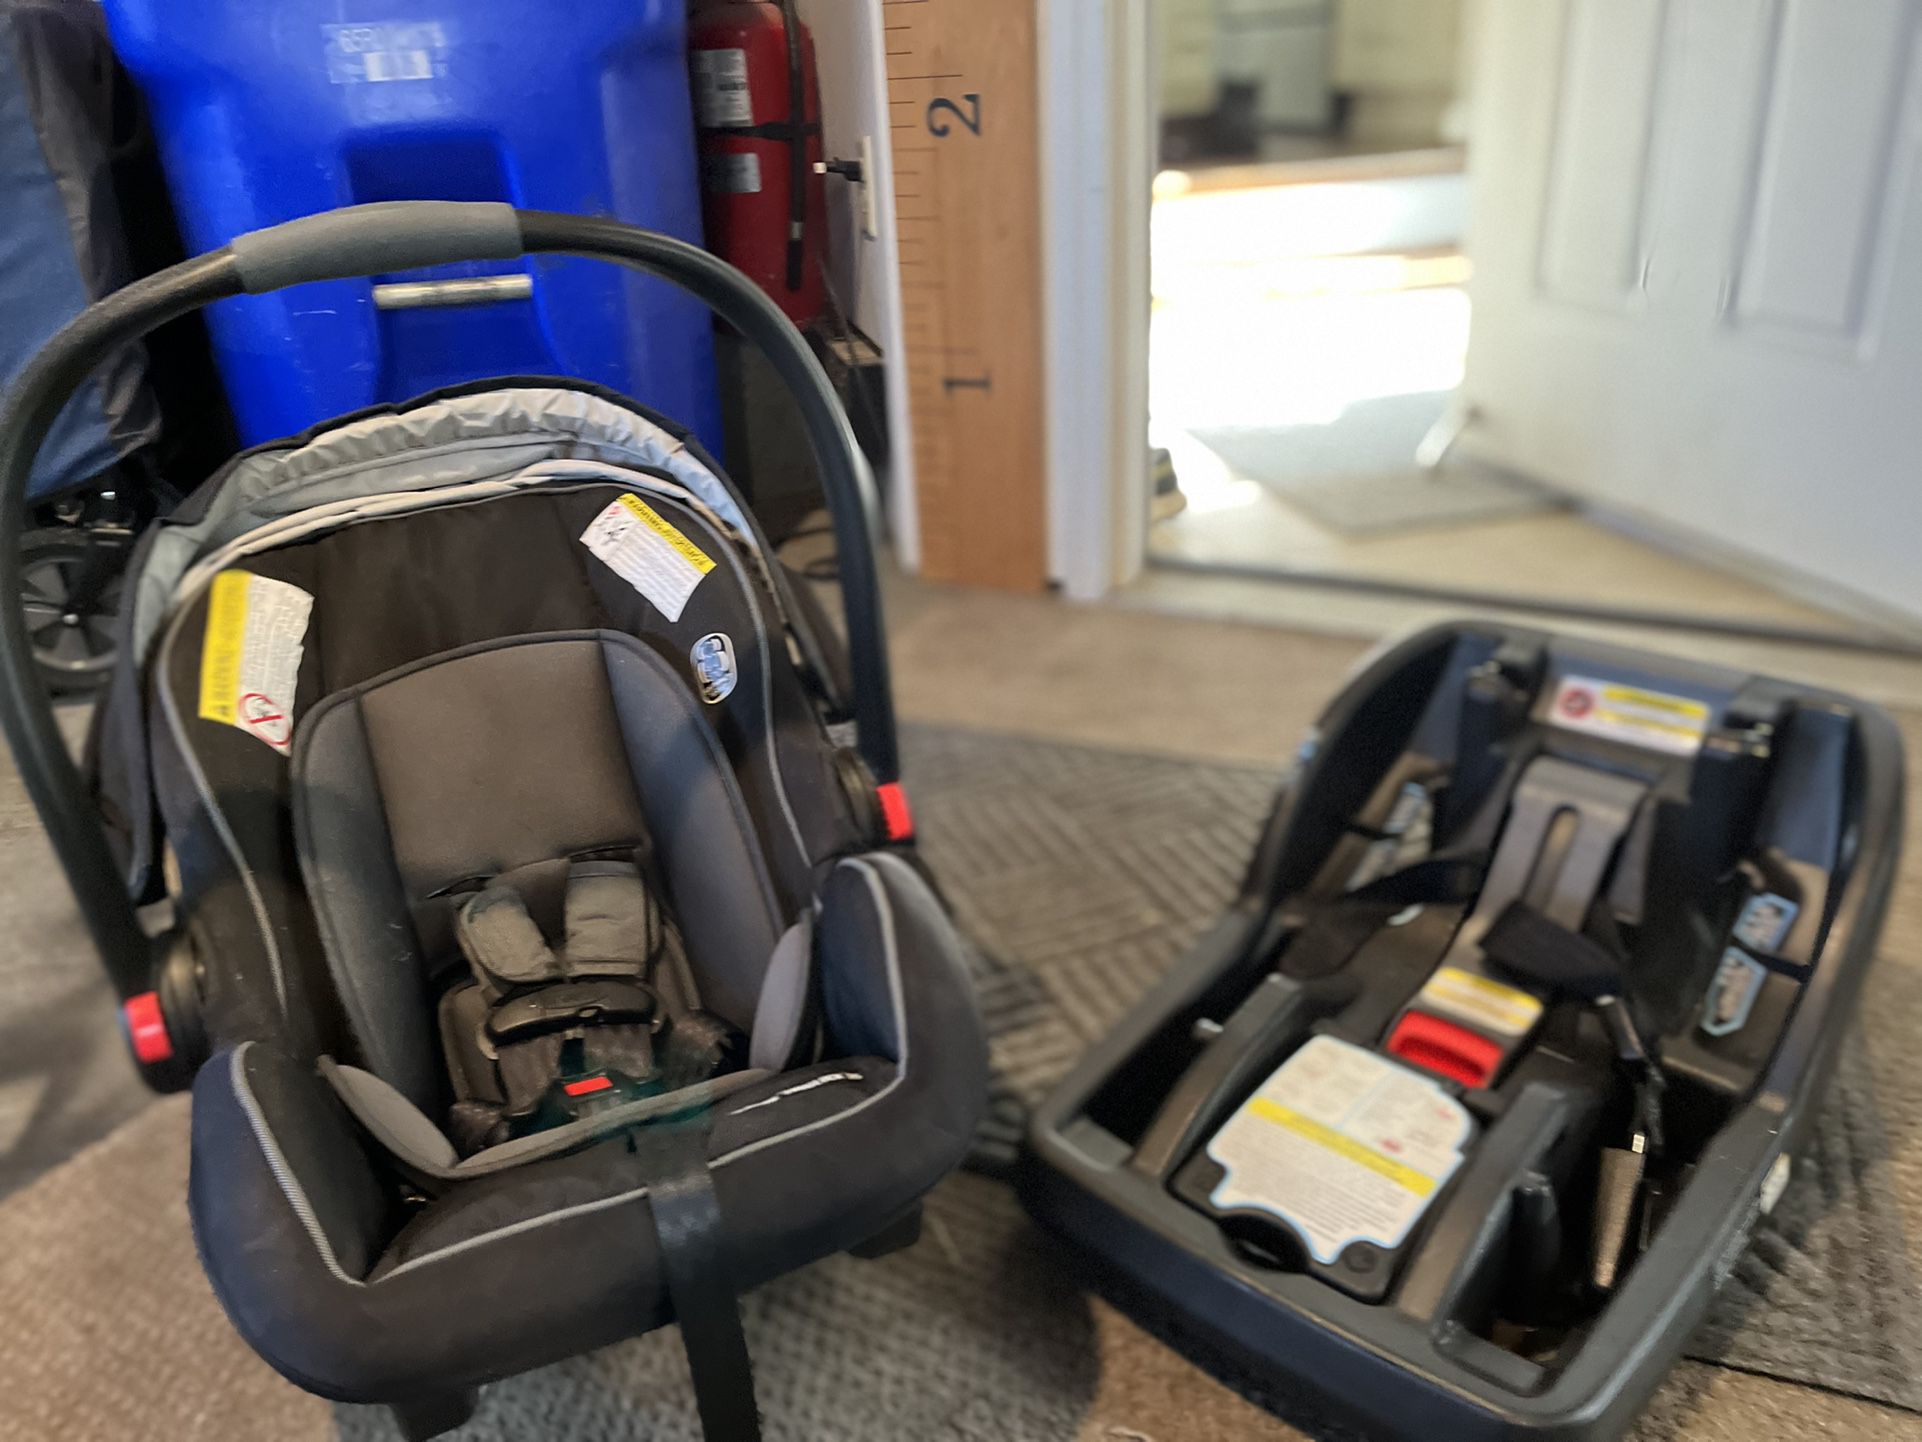 GRACO infant Car Seat And Jogging Stroller